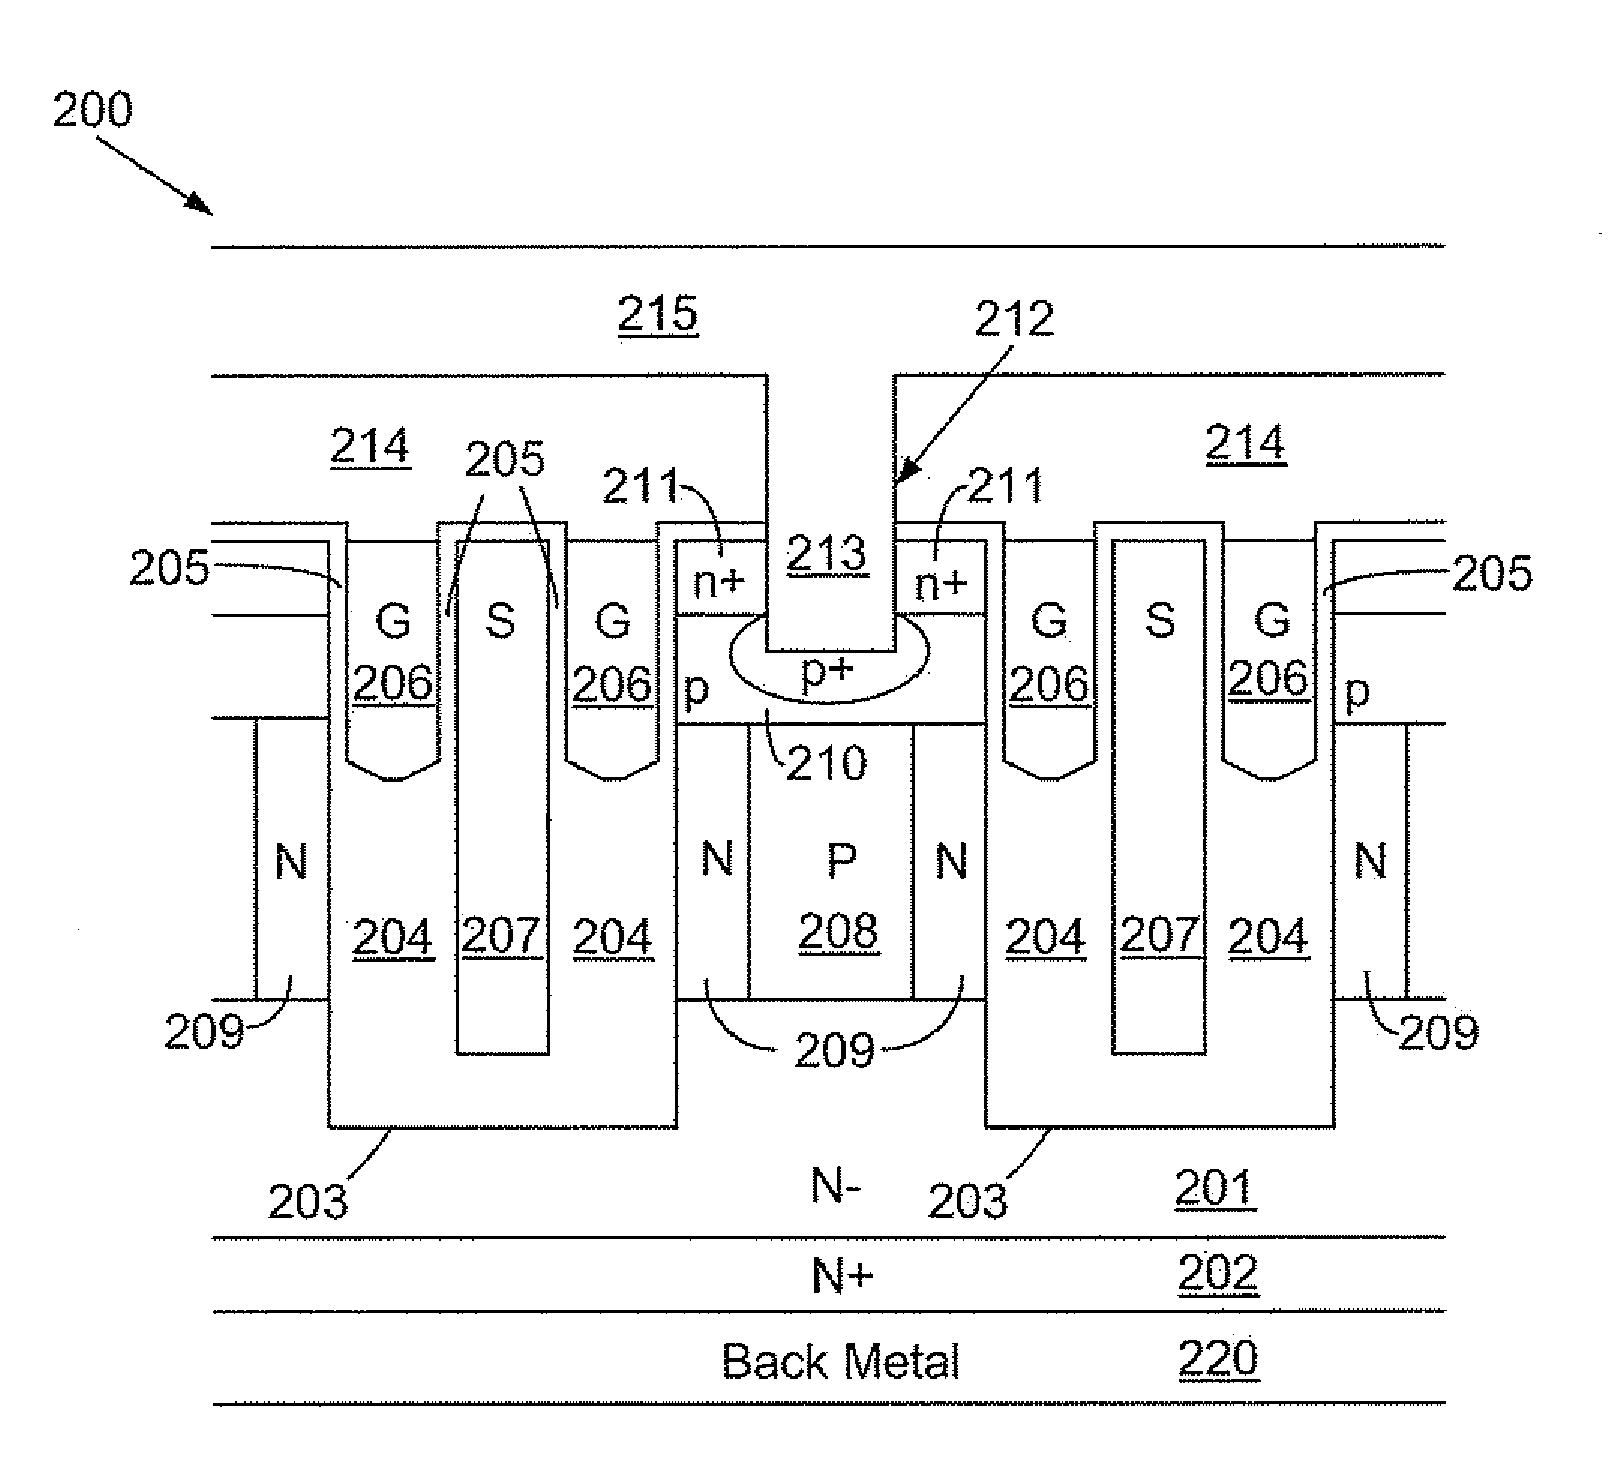 Super-junction trench mosfet with resurf stepped oxides and split gate electrodes